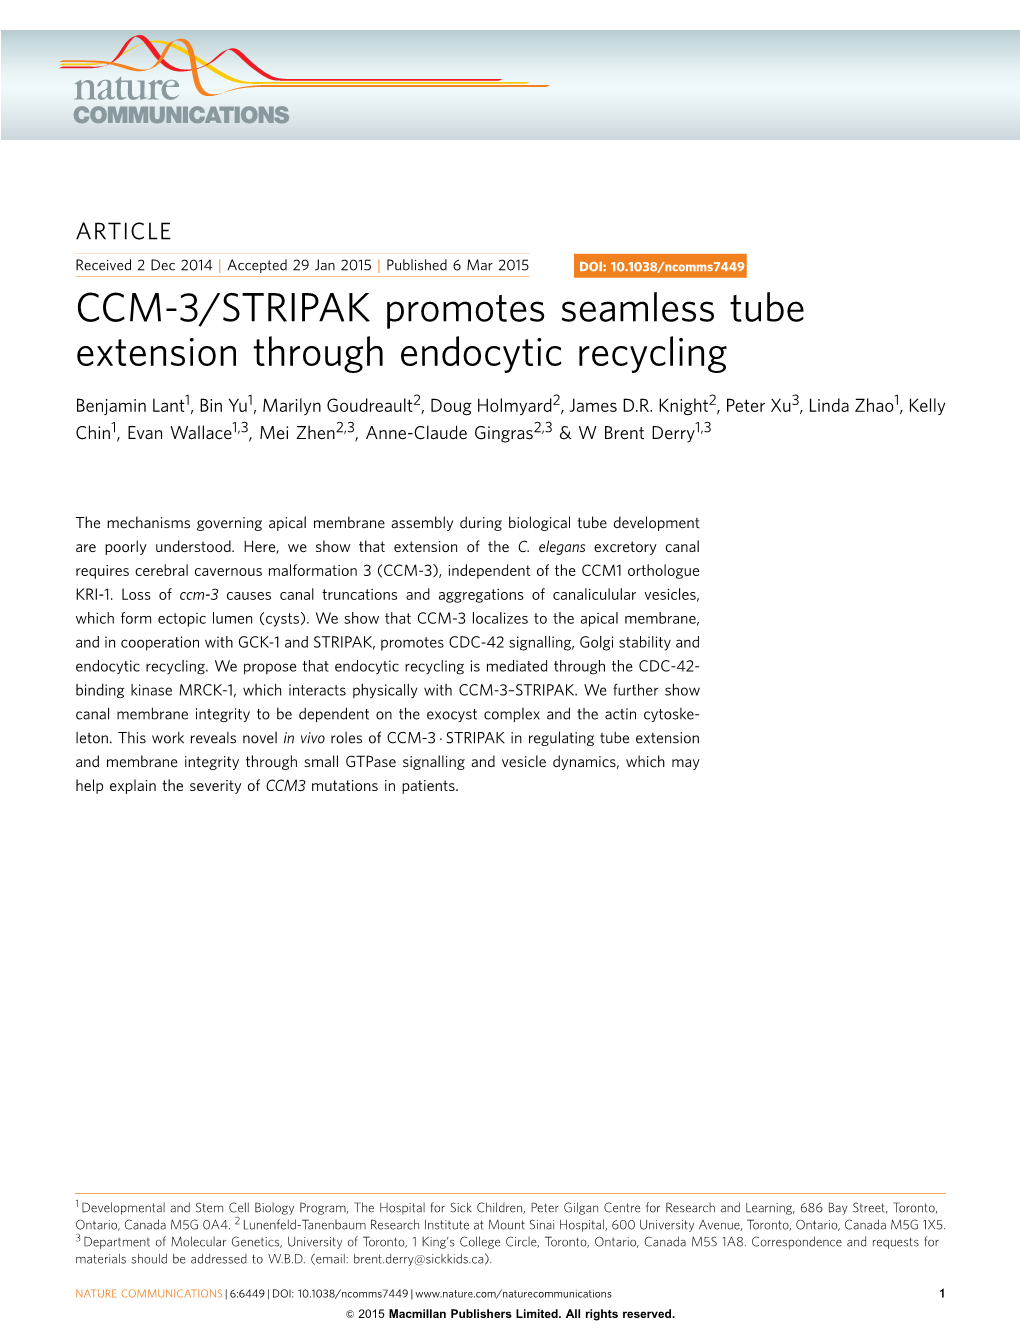 CCM-3/STRIPAK Promotes Seamless Tube Extension Through Endocytic Recycling